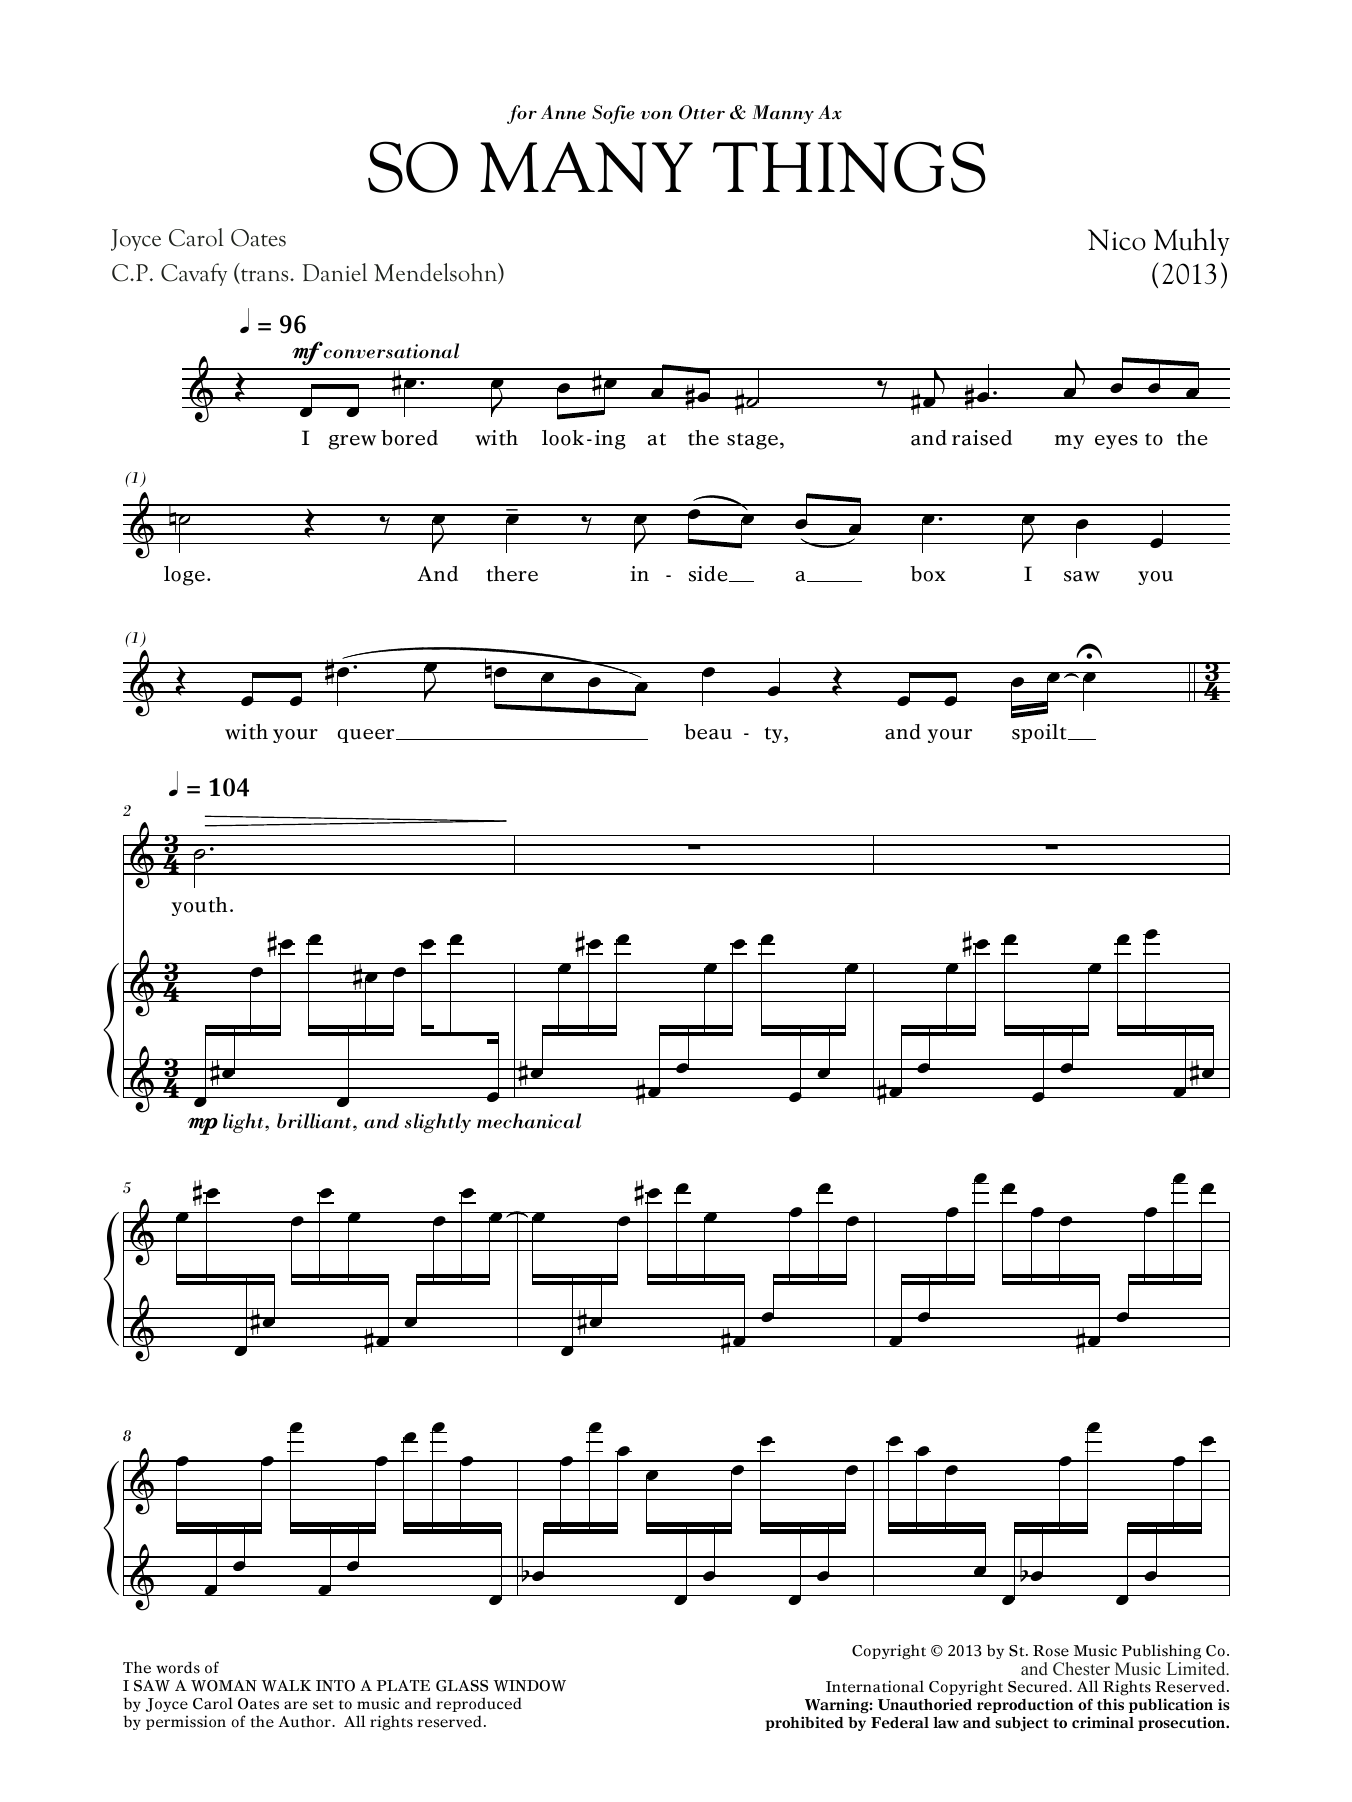 Download Nico Muhly So Many Things Sheet Music